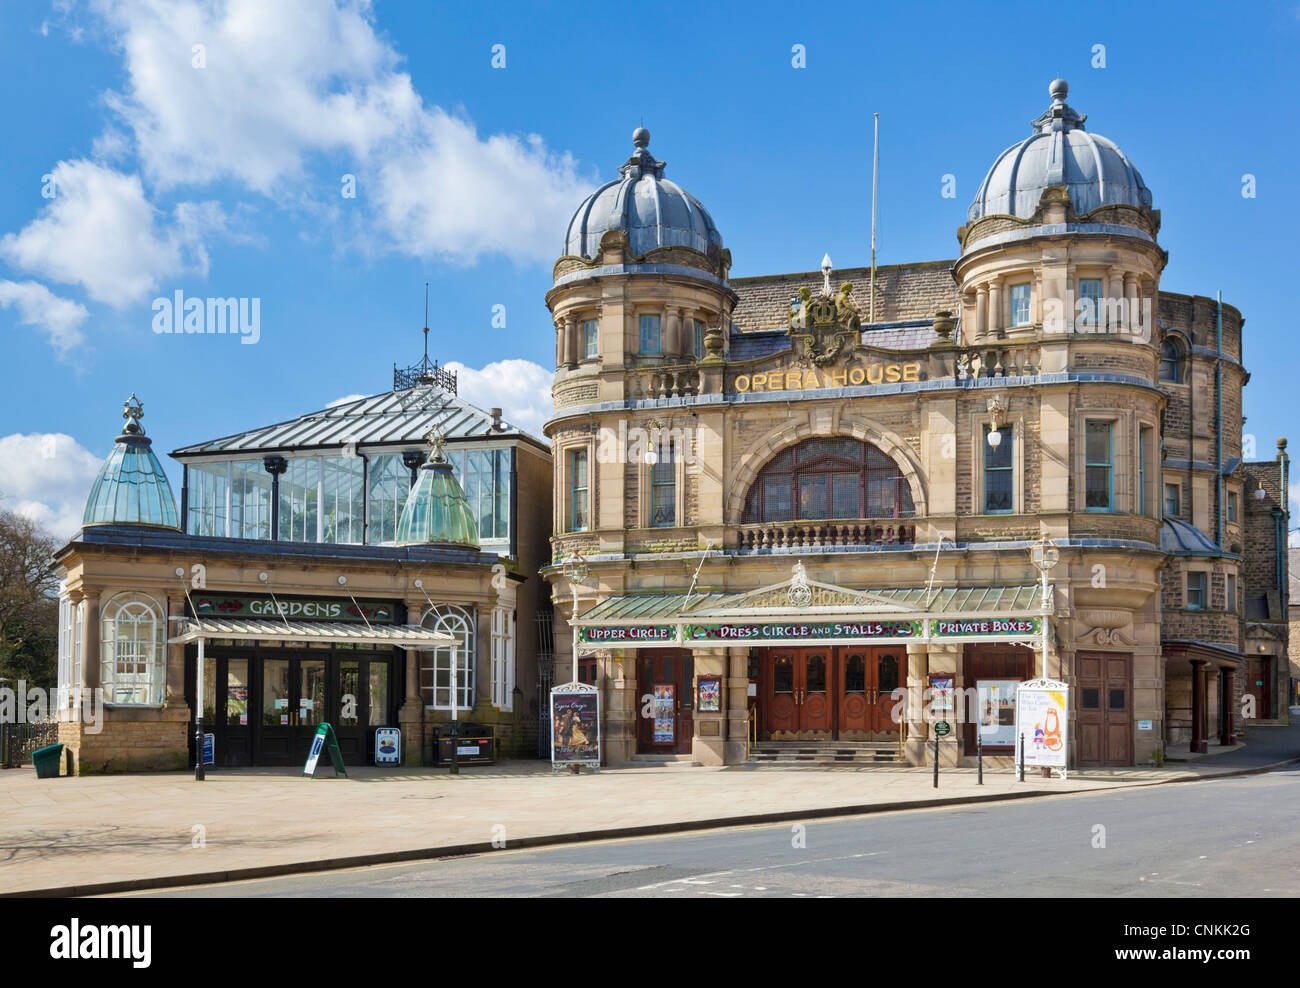 Buxton Opera House Derbyshire Angleterre GB Royaume-Uni Europe Banque D'Images